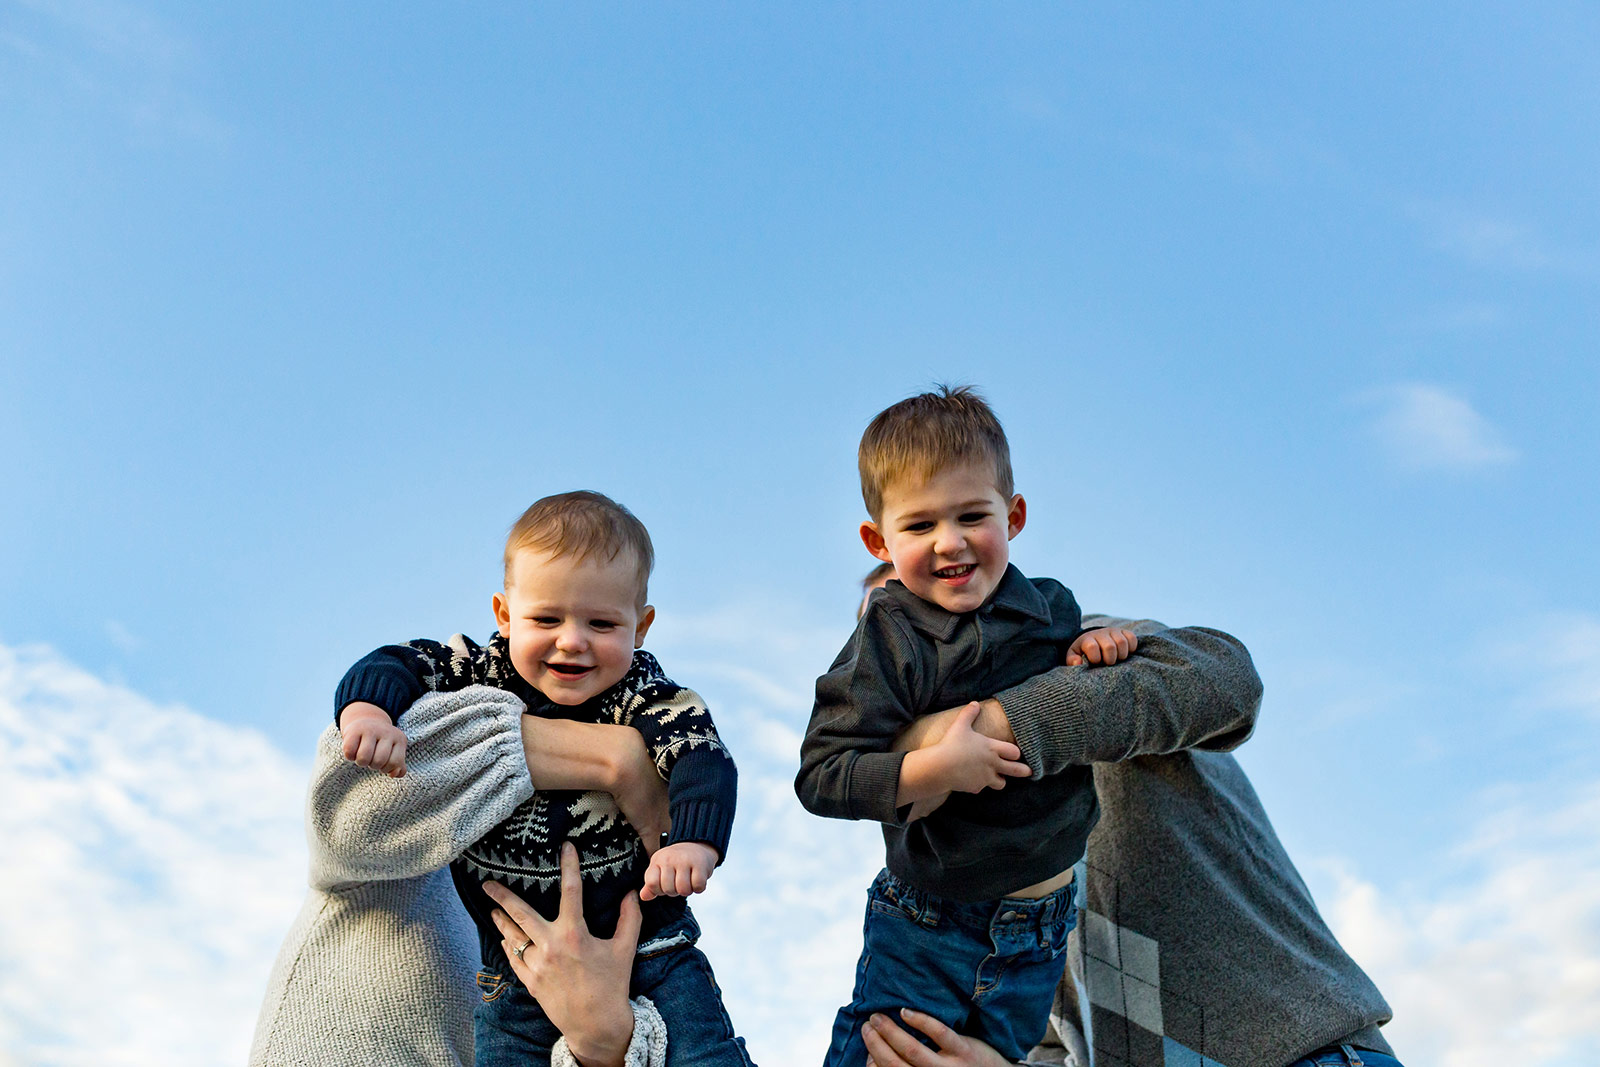 Both boys are lifted high up into the sky by their parents.